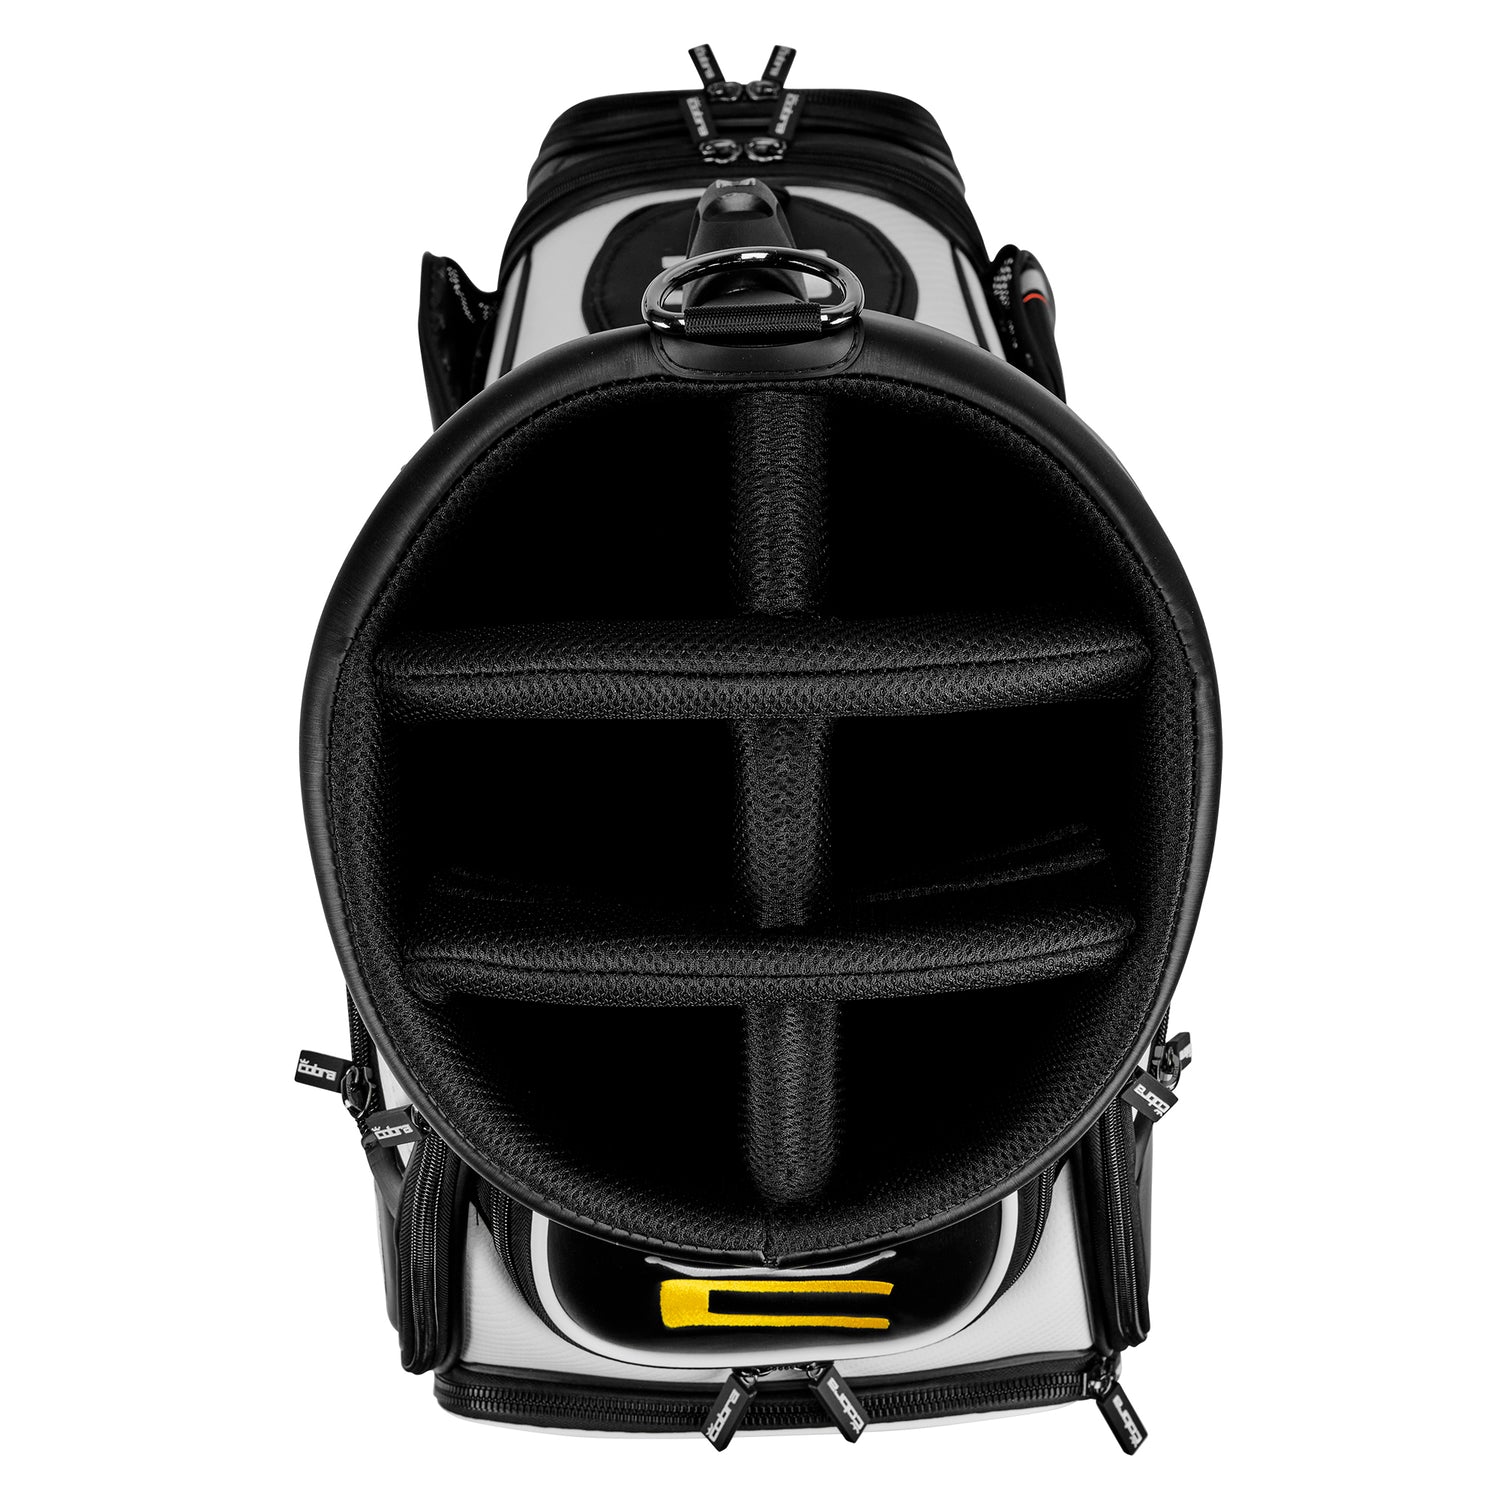 The Ultimate Guide to Leather Golf Bags